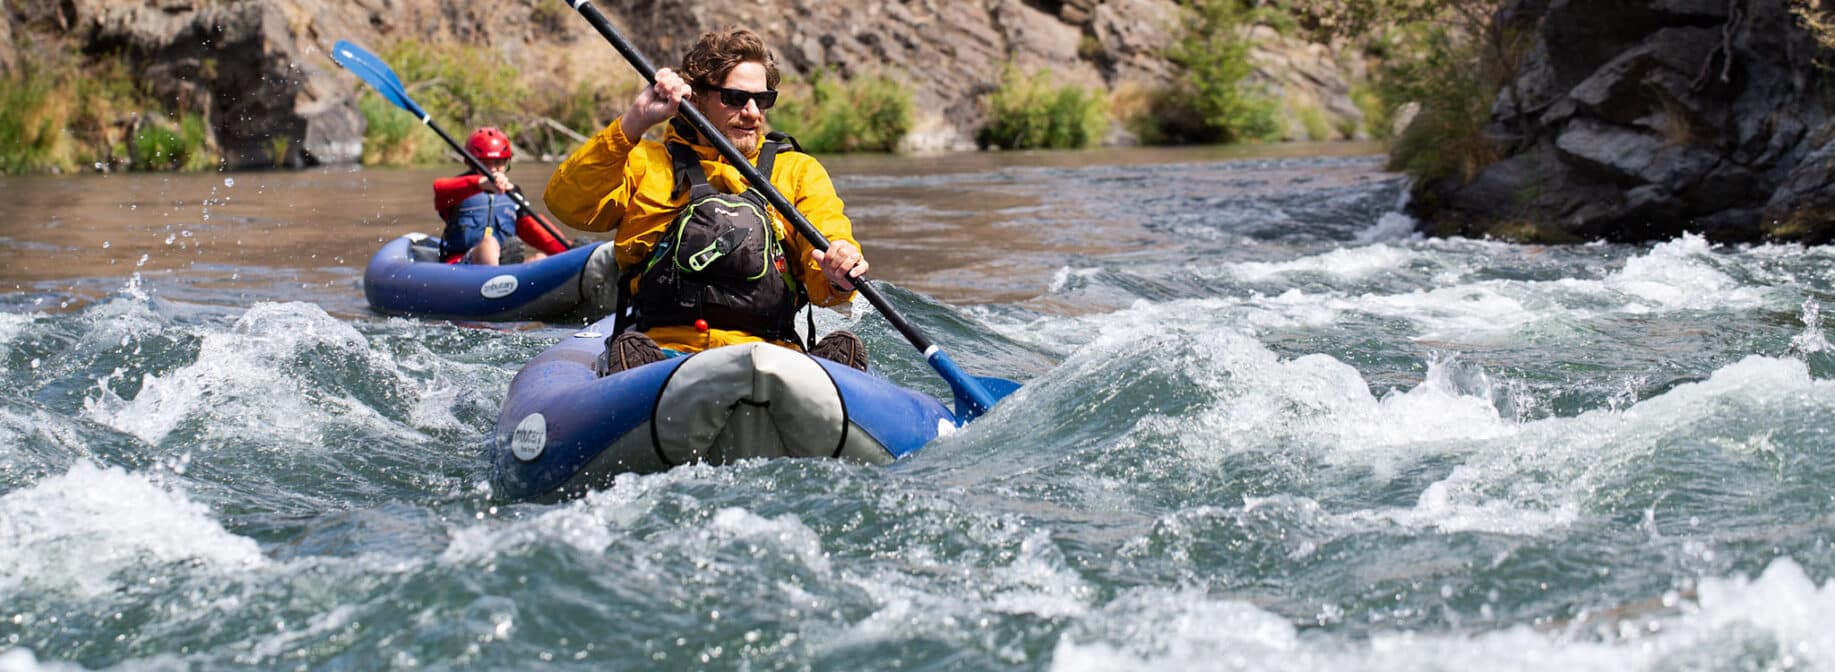 A man water rafting with another person following behind in another raft.